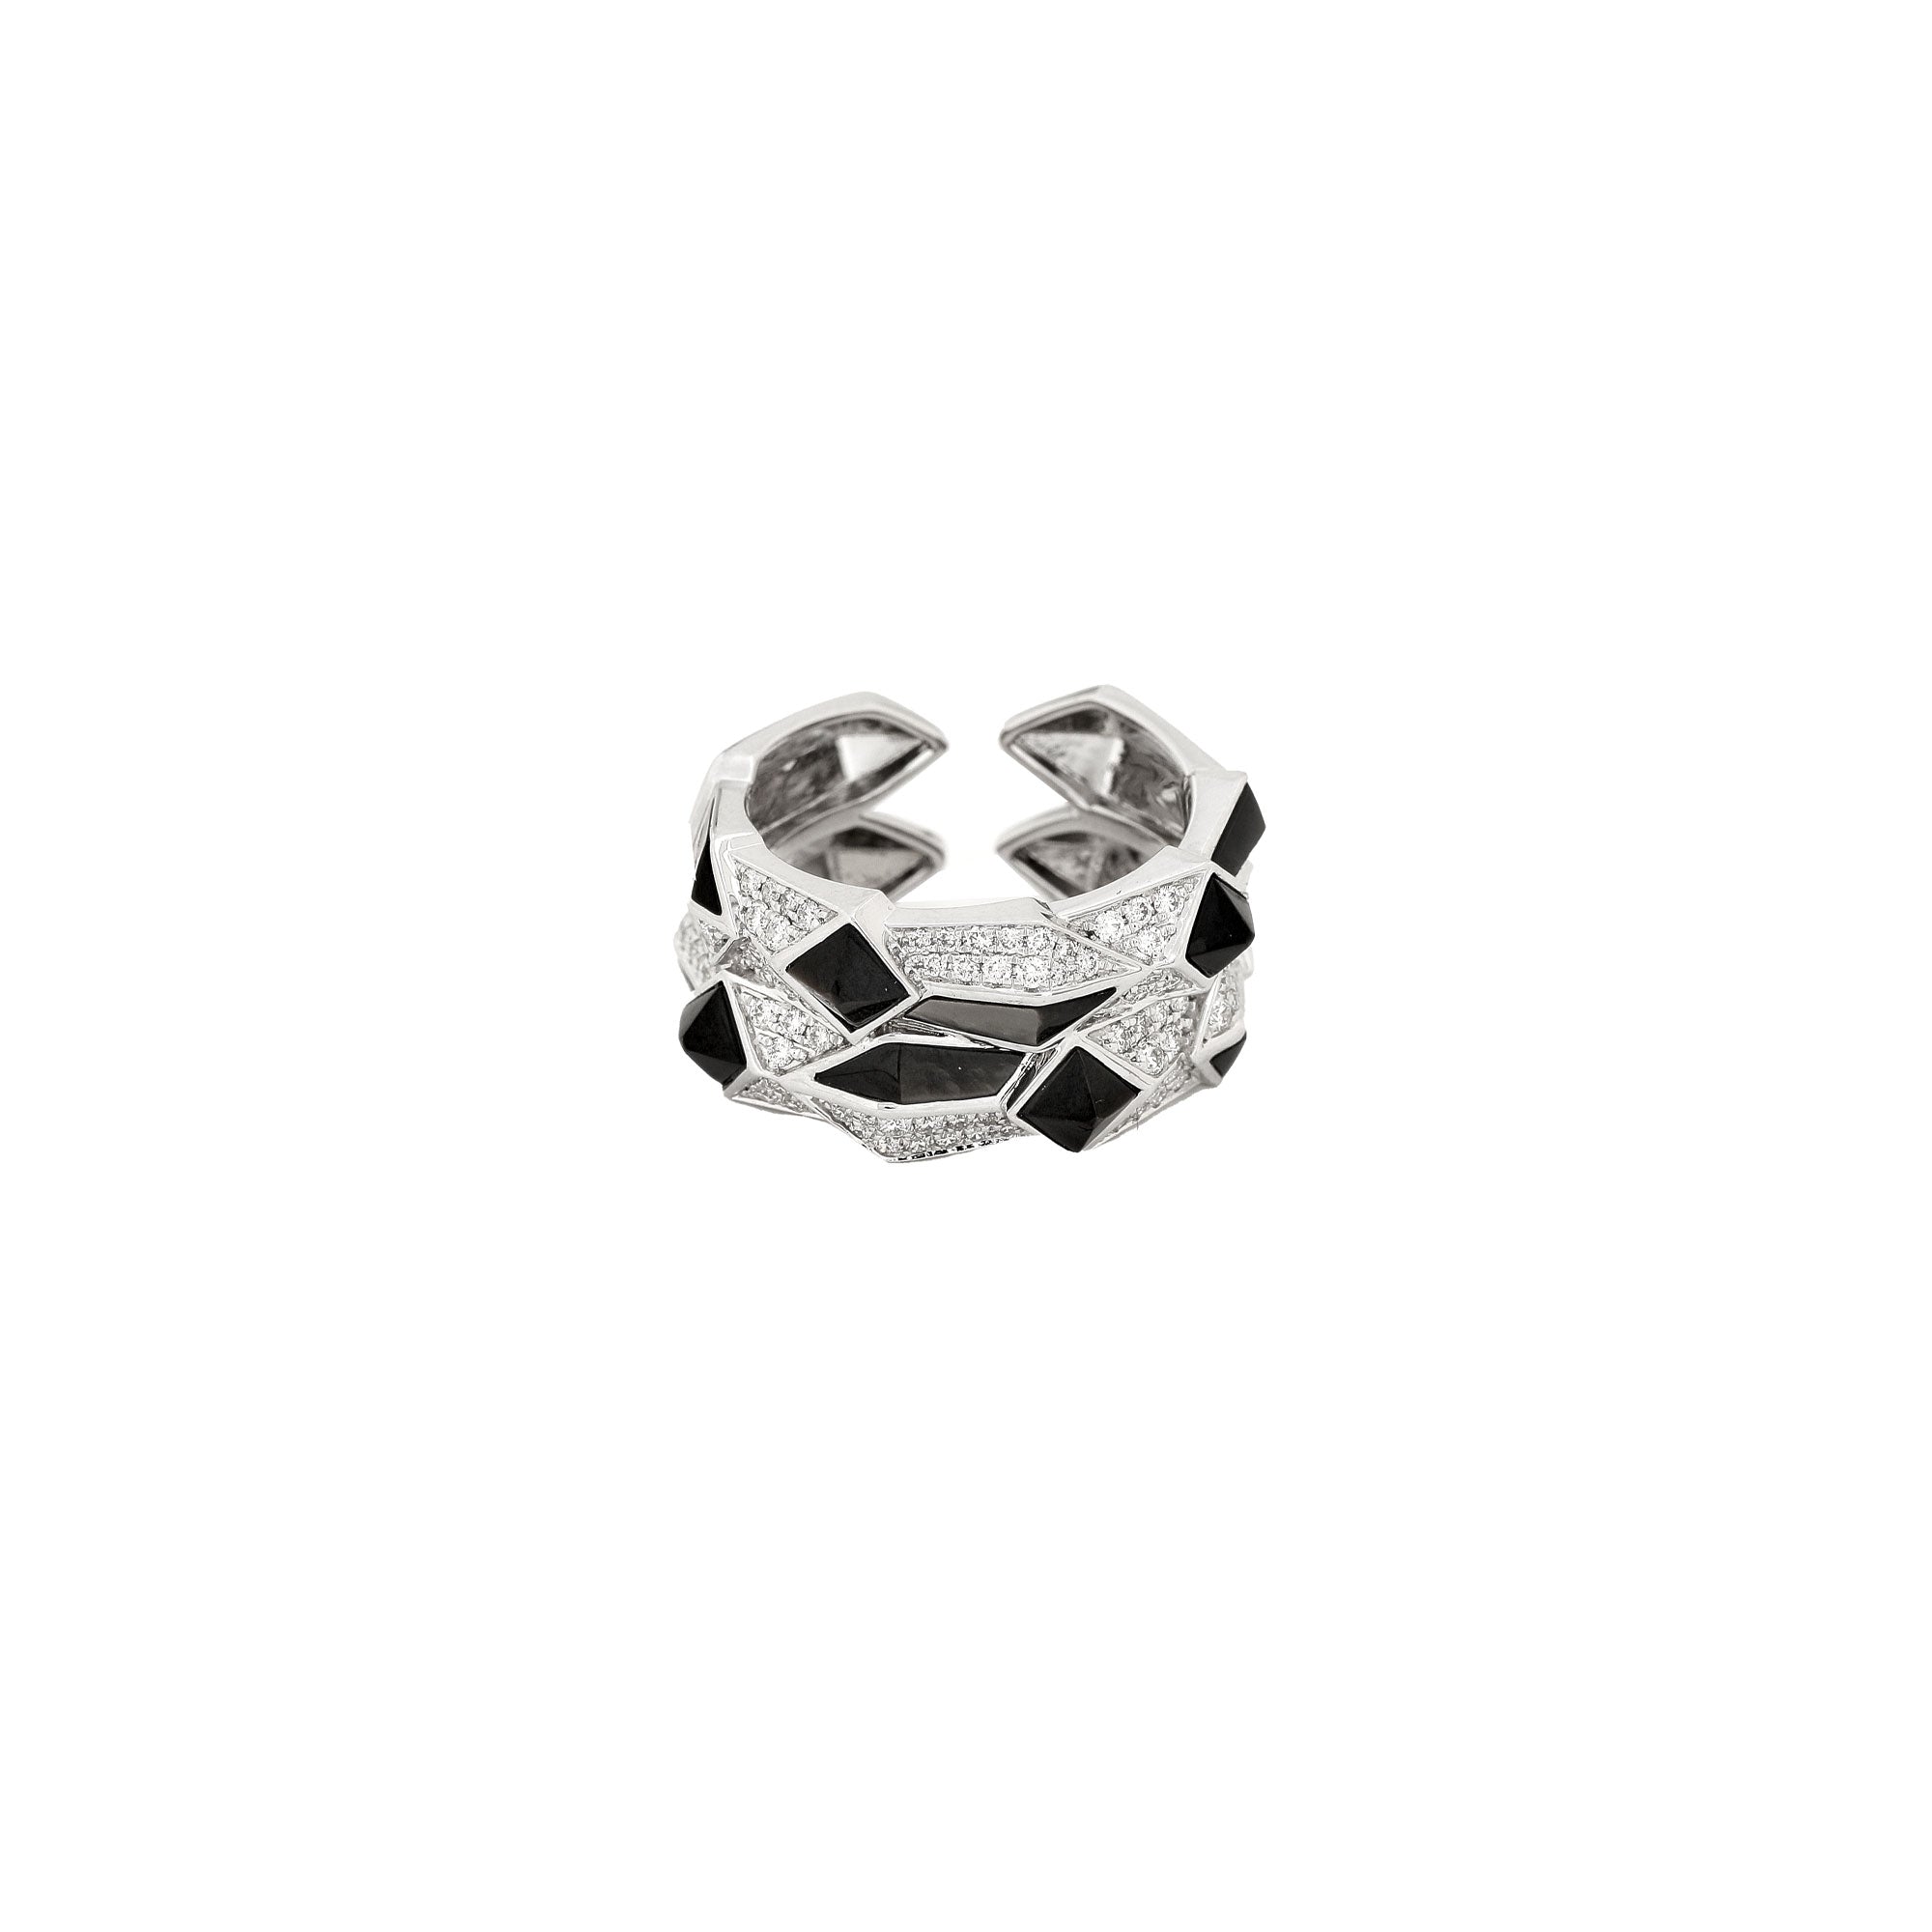 Black Mother of Pearl Edgy Doble Ring